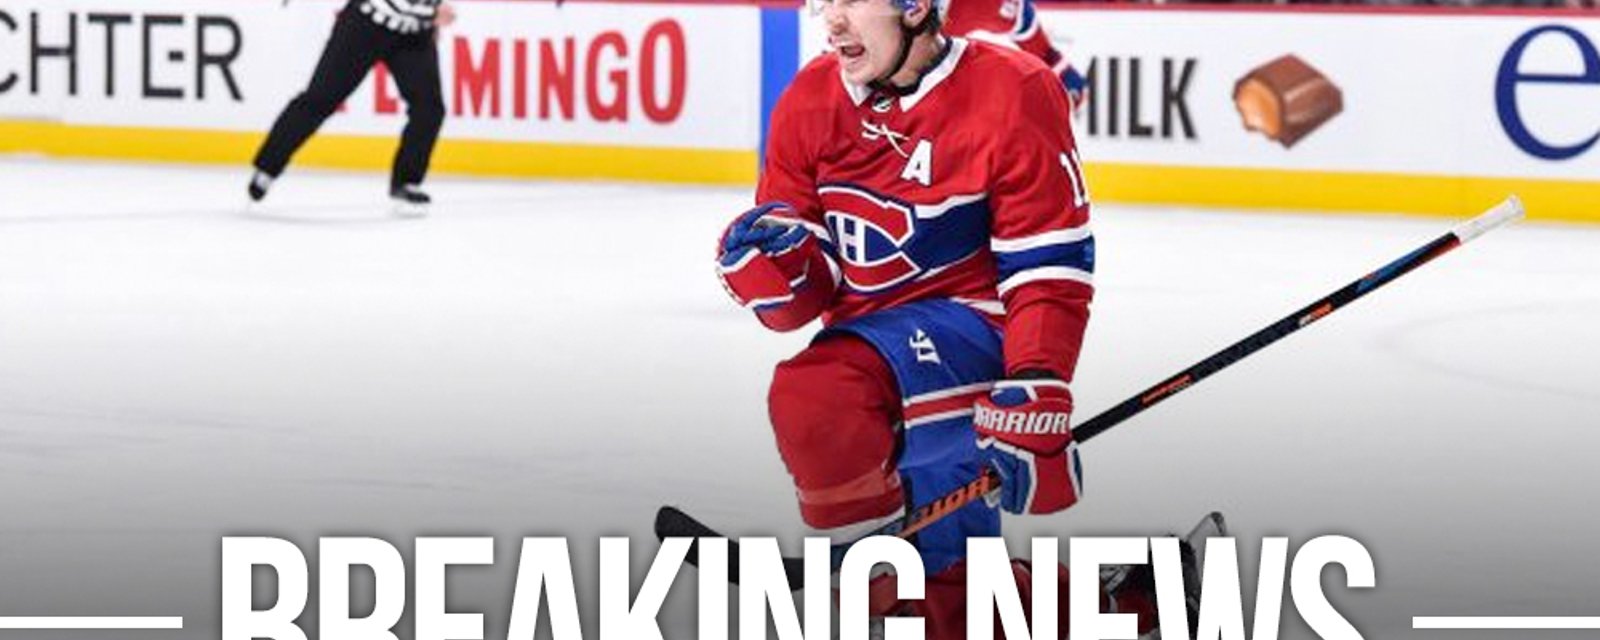 Brendan Gallagher signs a six year deal for big money